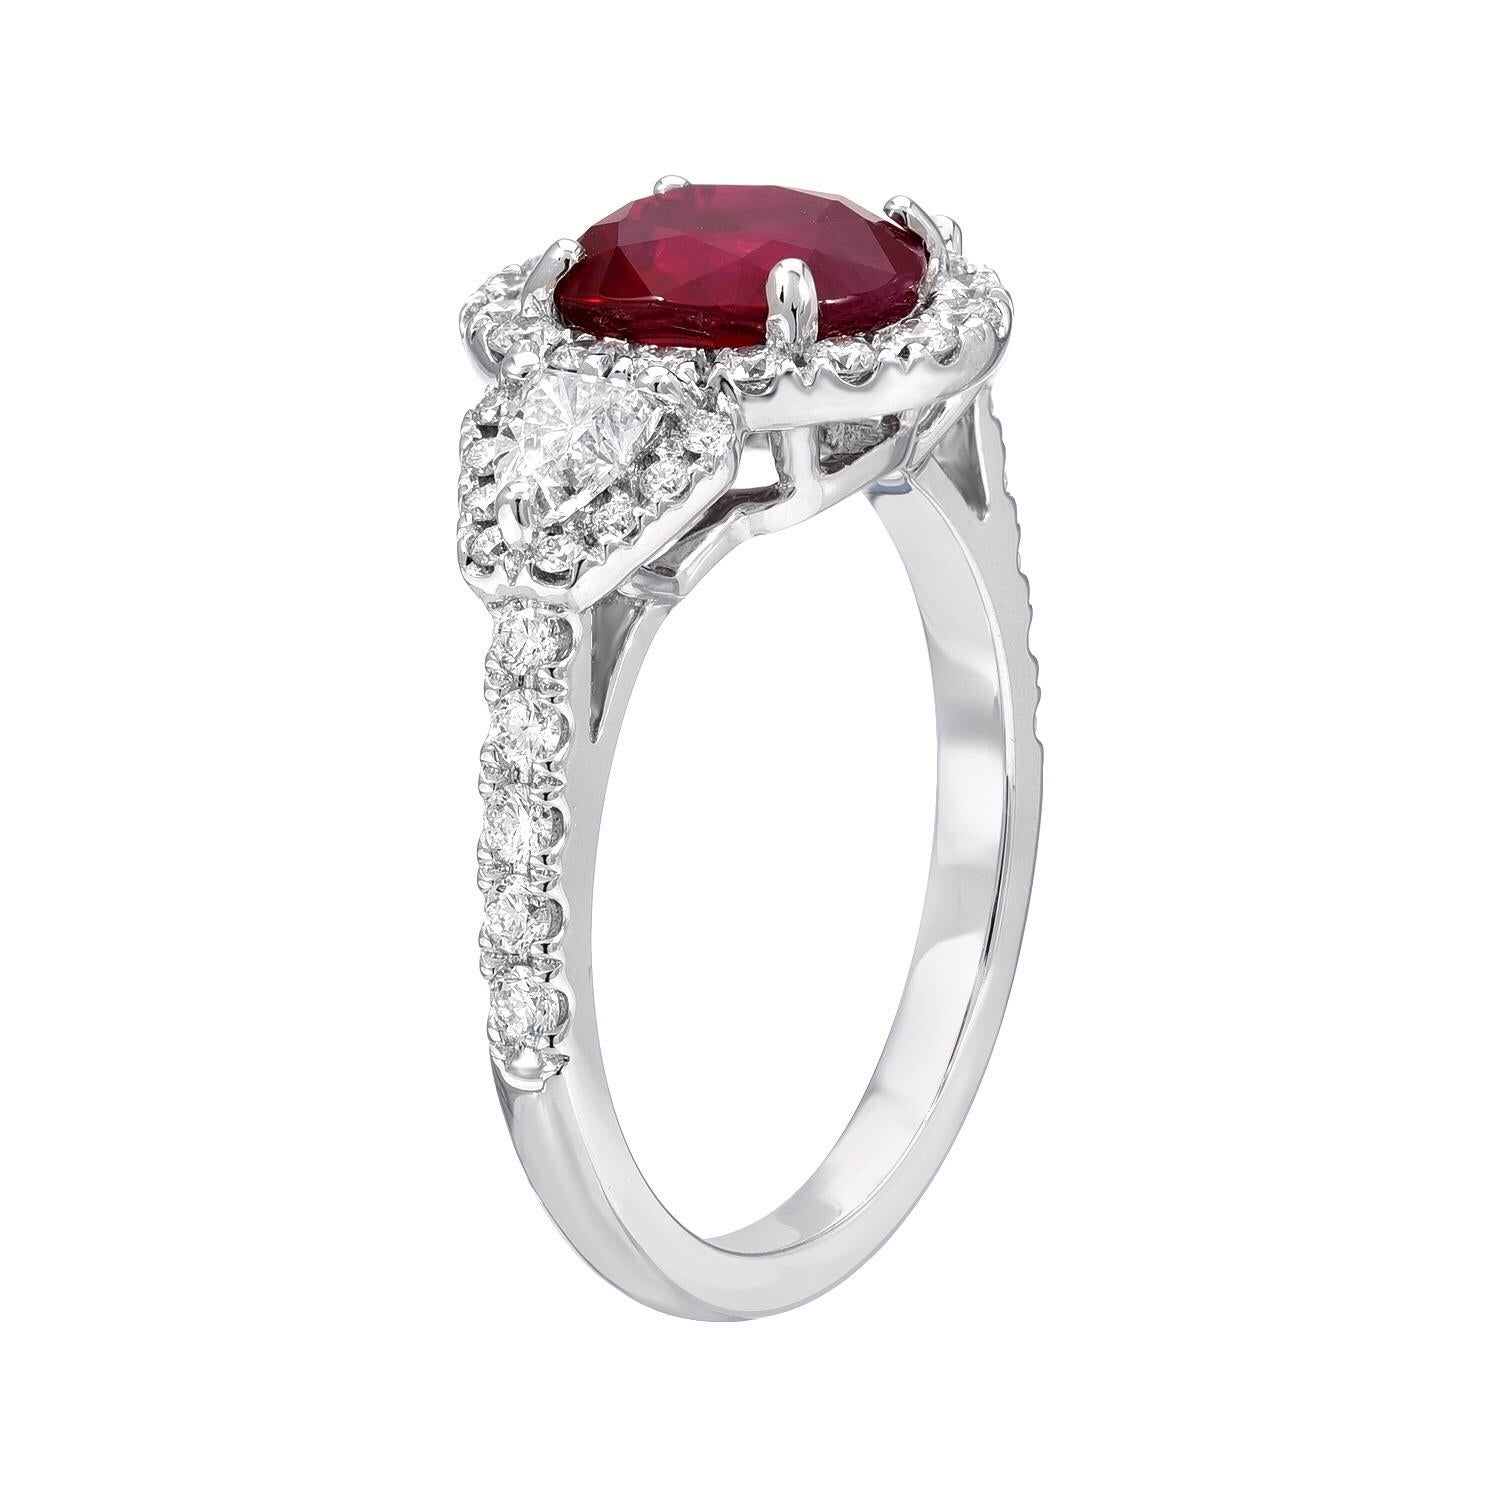 Burma Ruby oval weighing a total of 2.38 carats is surrounded by a total of 0.64 carat diamonds in this special 18K white gold cocktail or engagement ring.
Size 6.25. Re-sizing is complimentary upon request.

Returns are accepted and paid by us